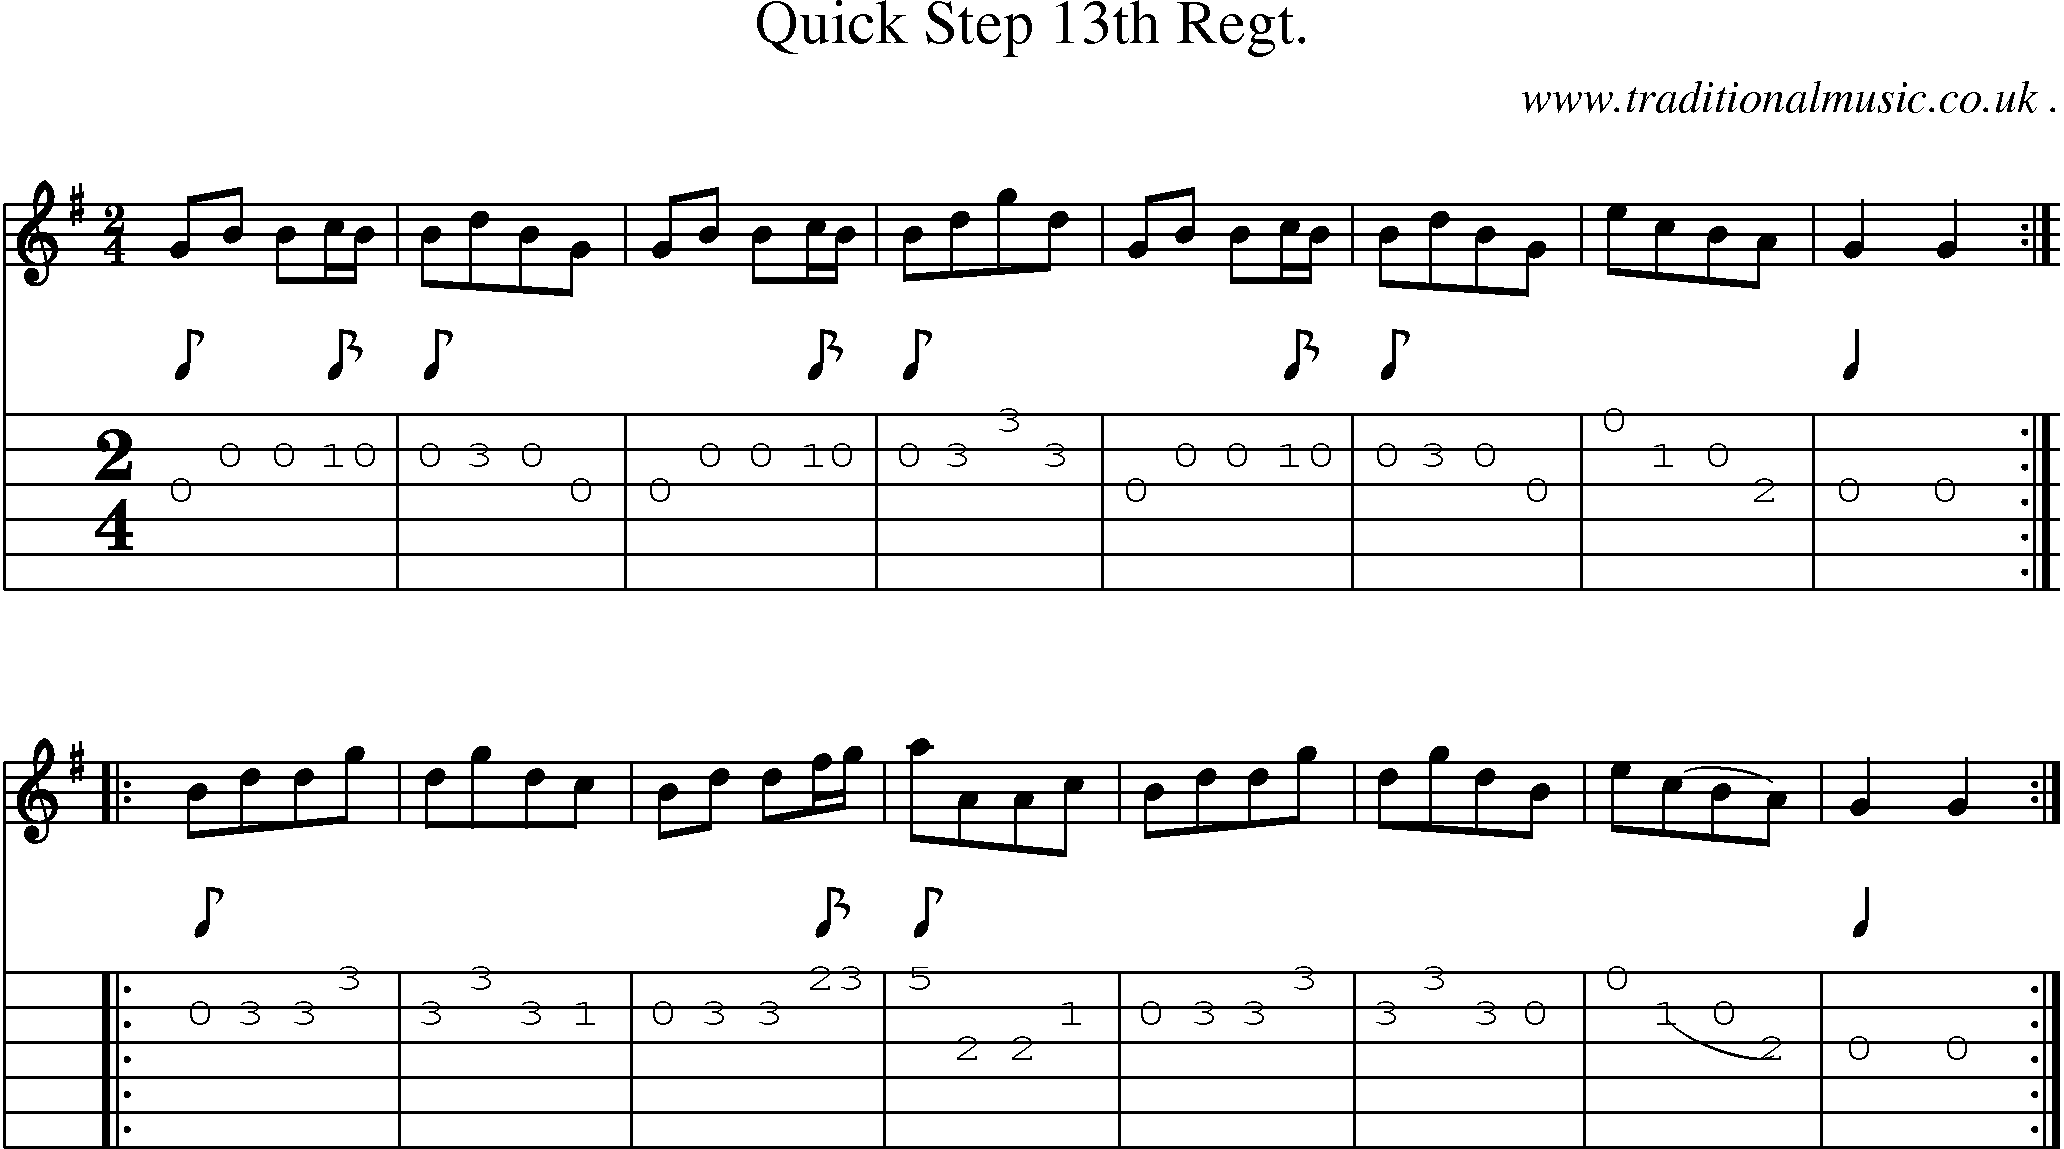 Sheet-Music and Guitar Tabs for Quick Step 13th Regt